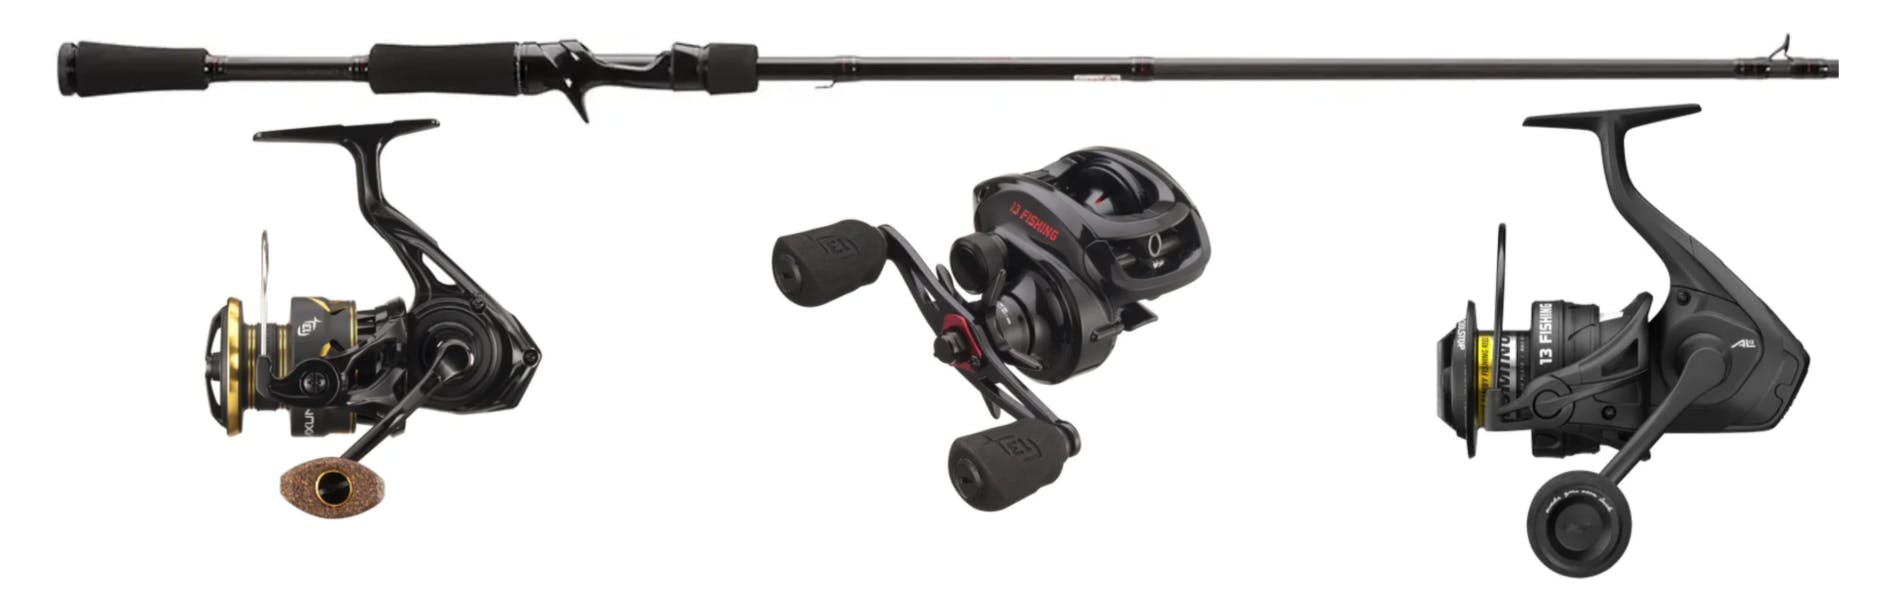 13 Fishing Saltwater Baitcast Reel Right Fishing Reels for sale